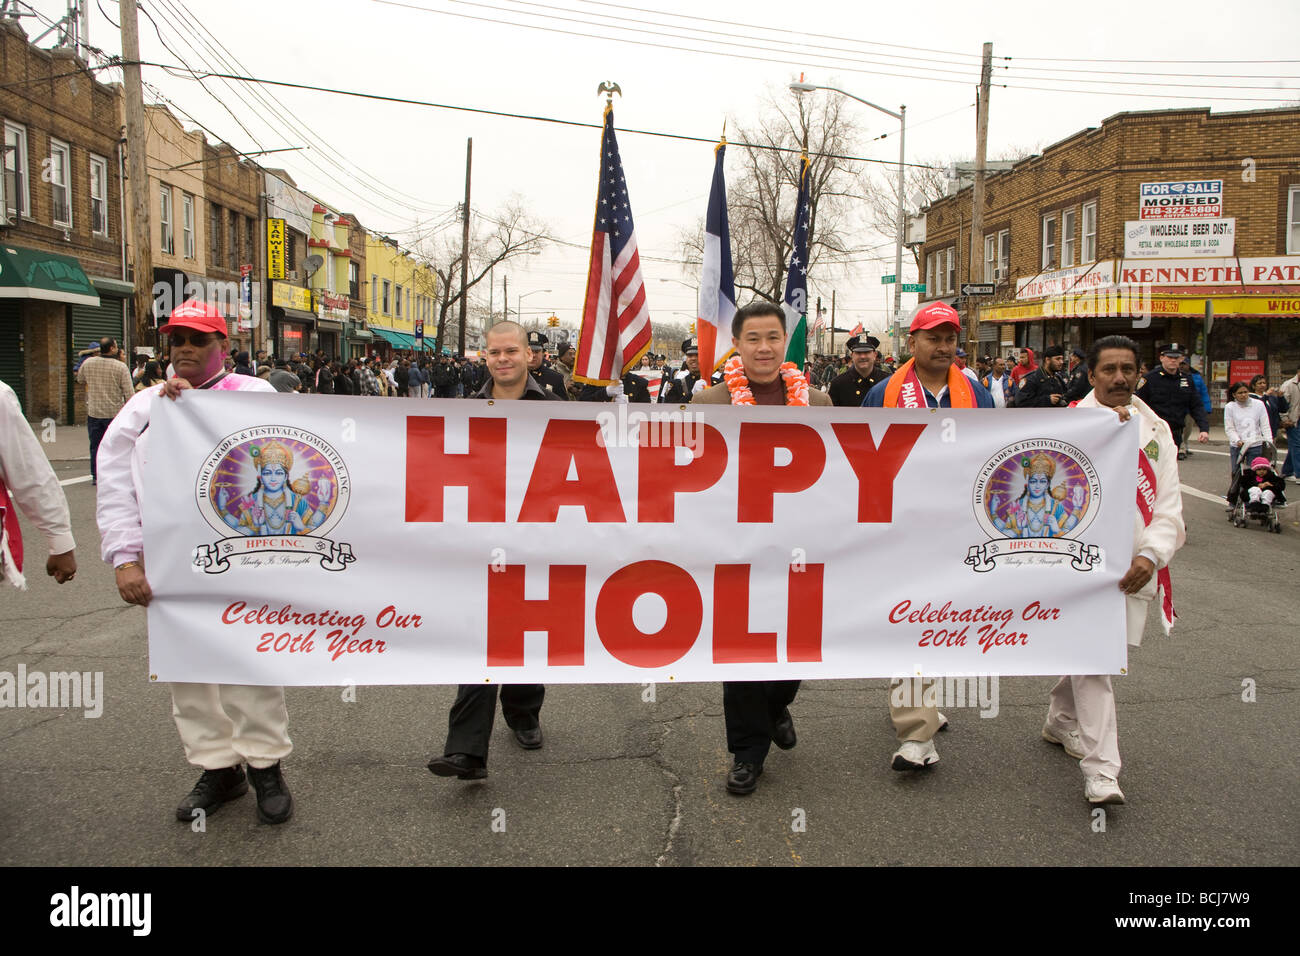 Hindu spring festival called Holi also known as Phagwah in the West Indies being celebrated in Queens, NY Stock Photo